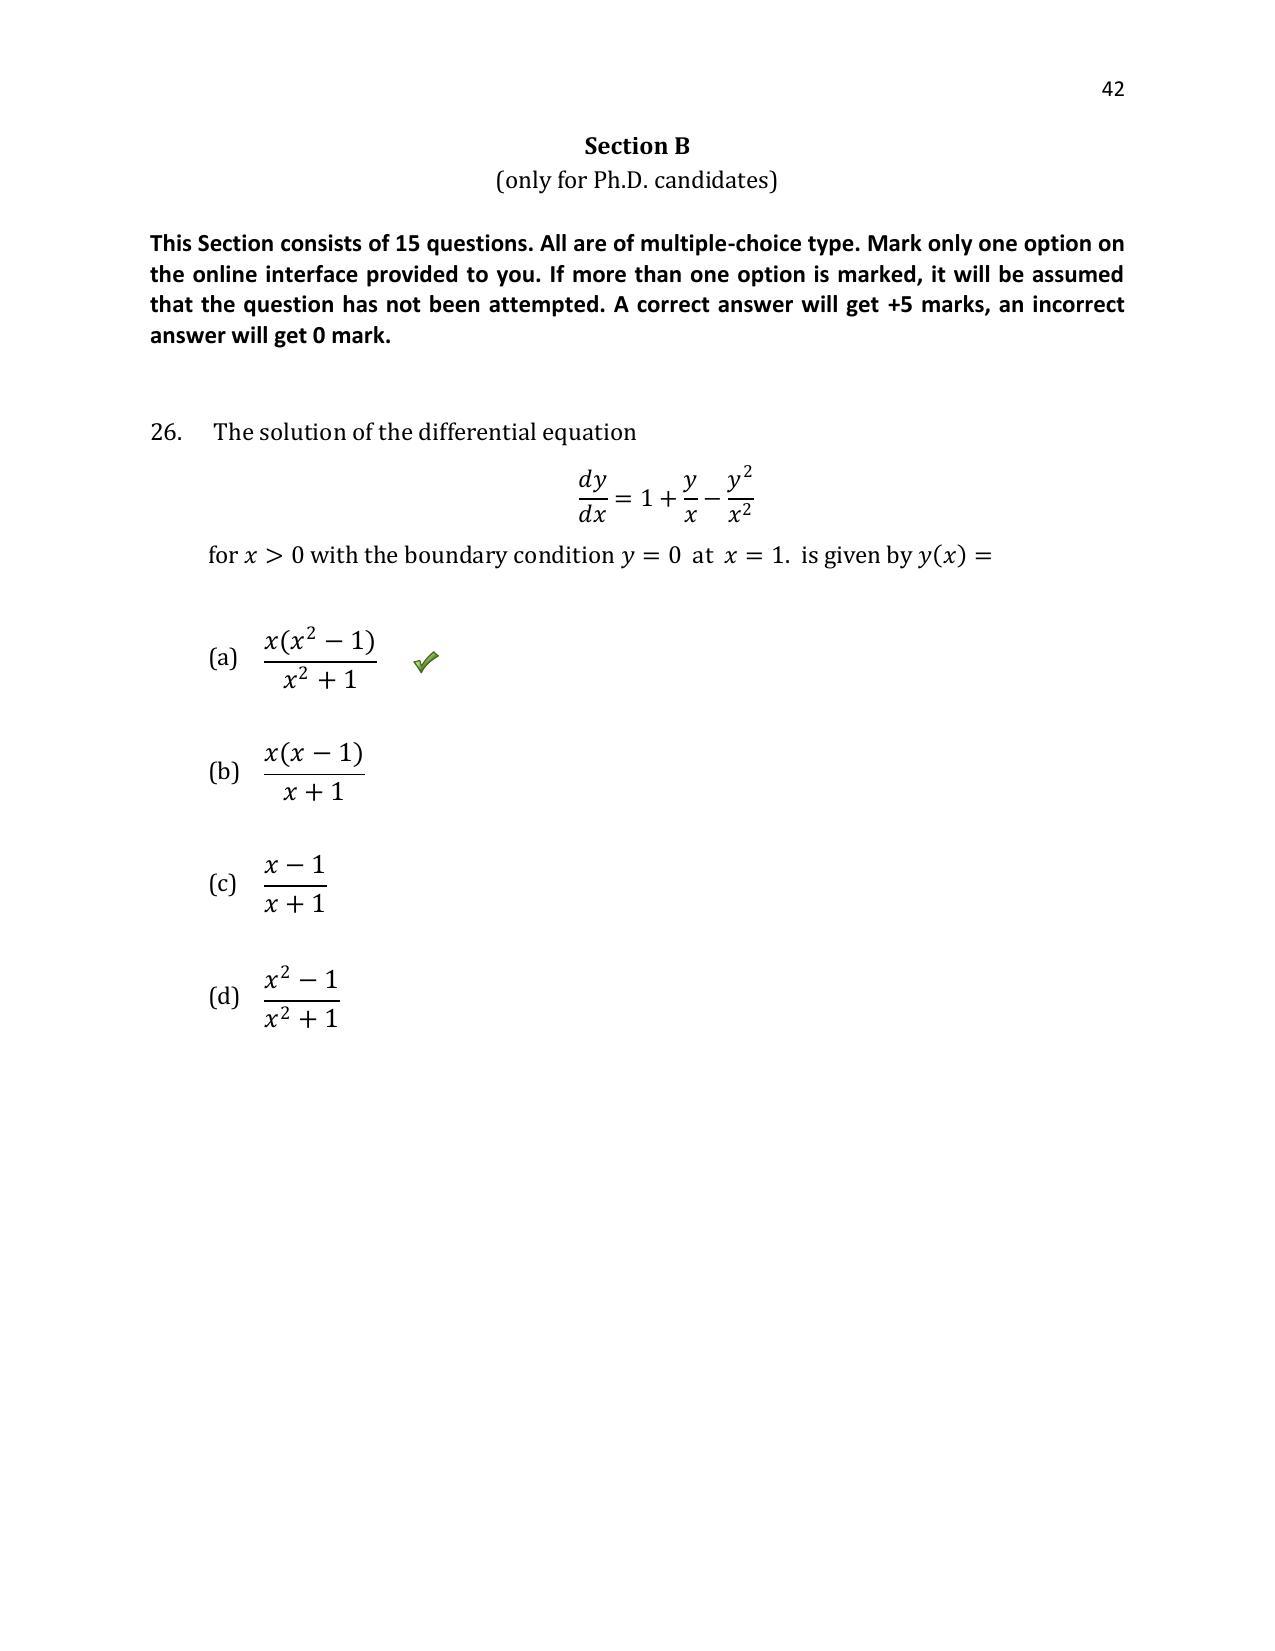 TIFR GS 2020 Physics Question Paper - Page 43